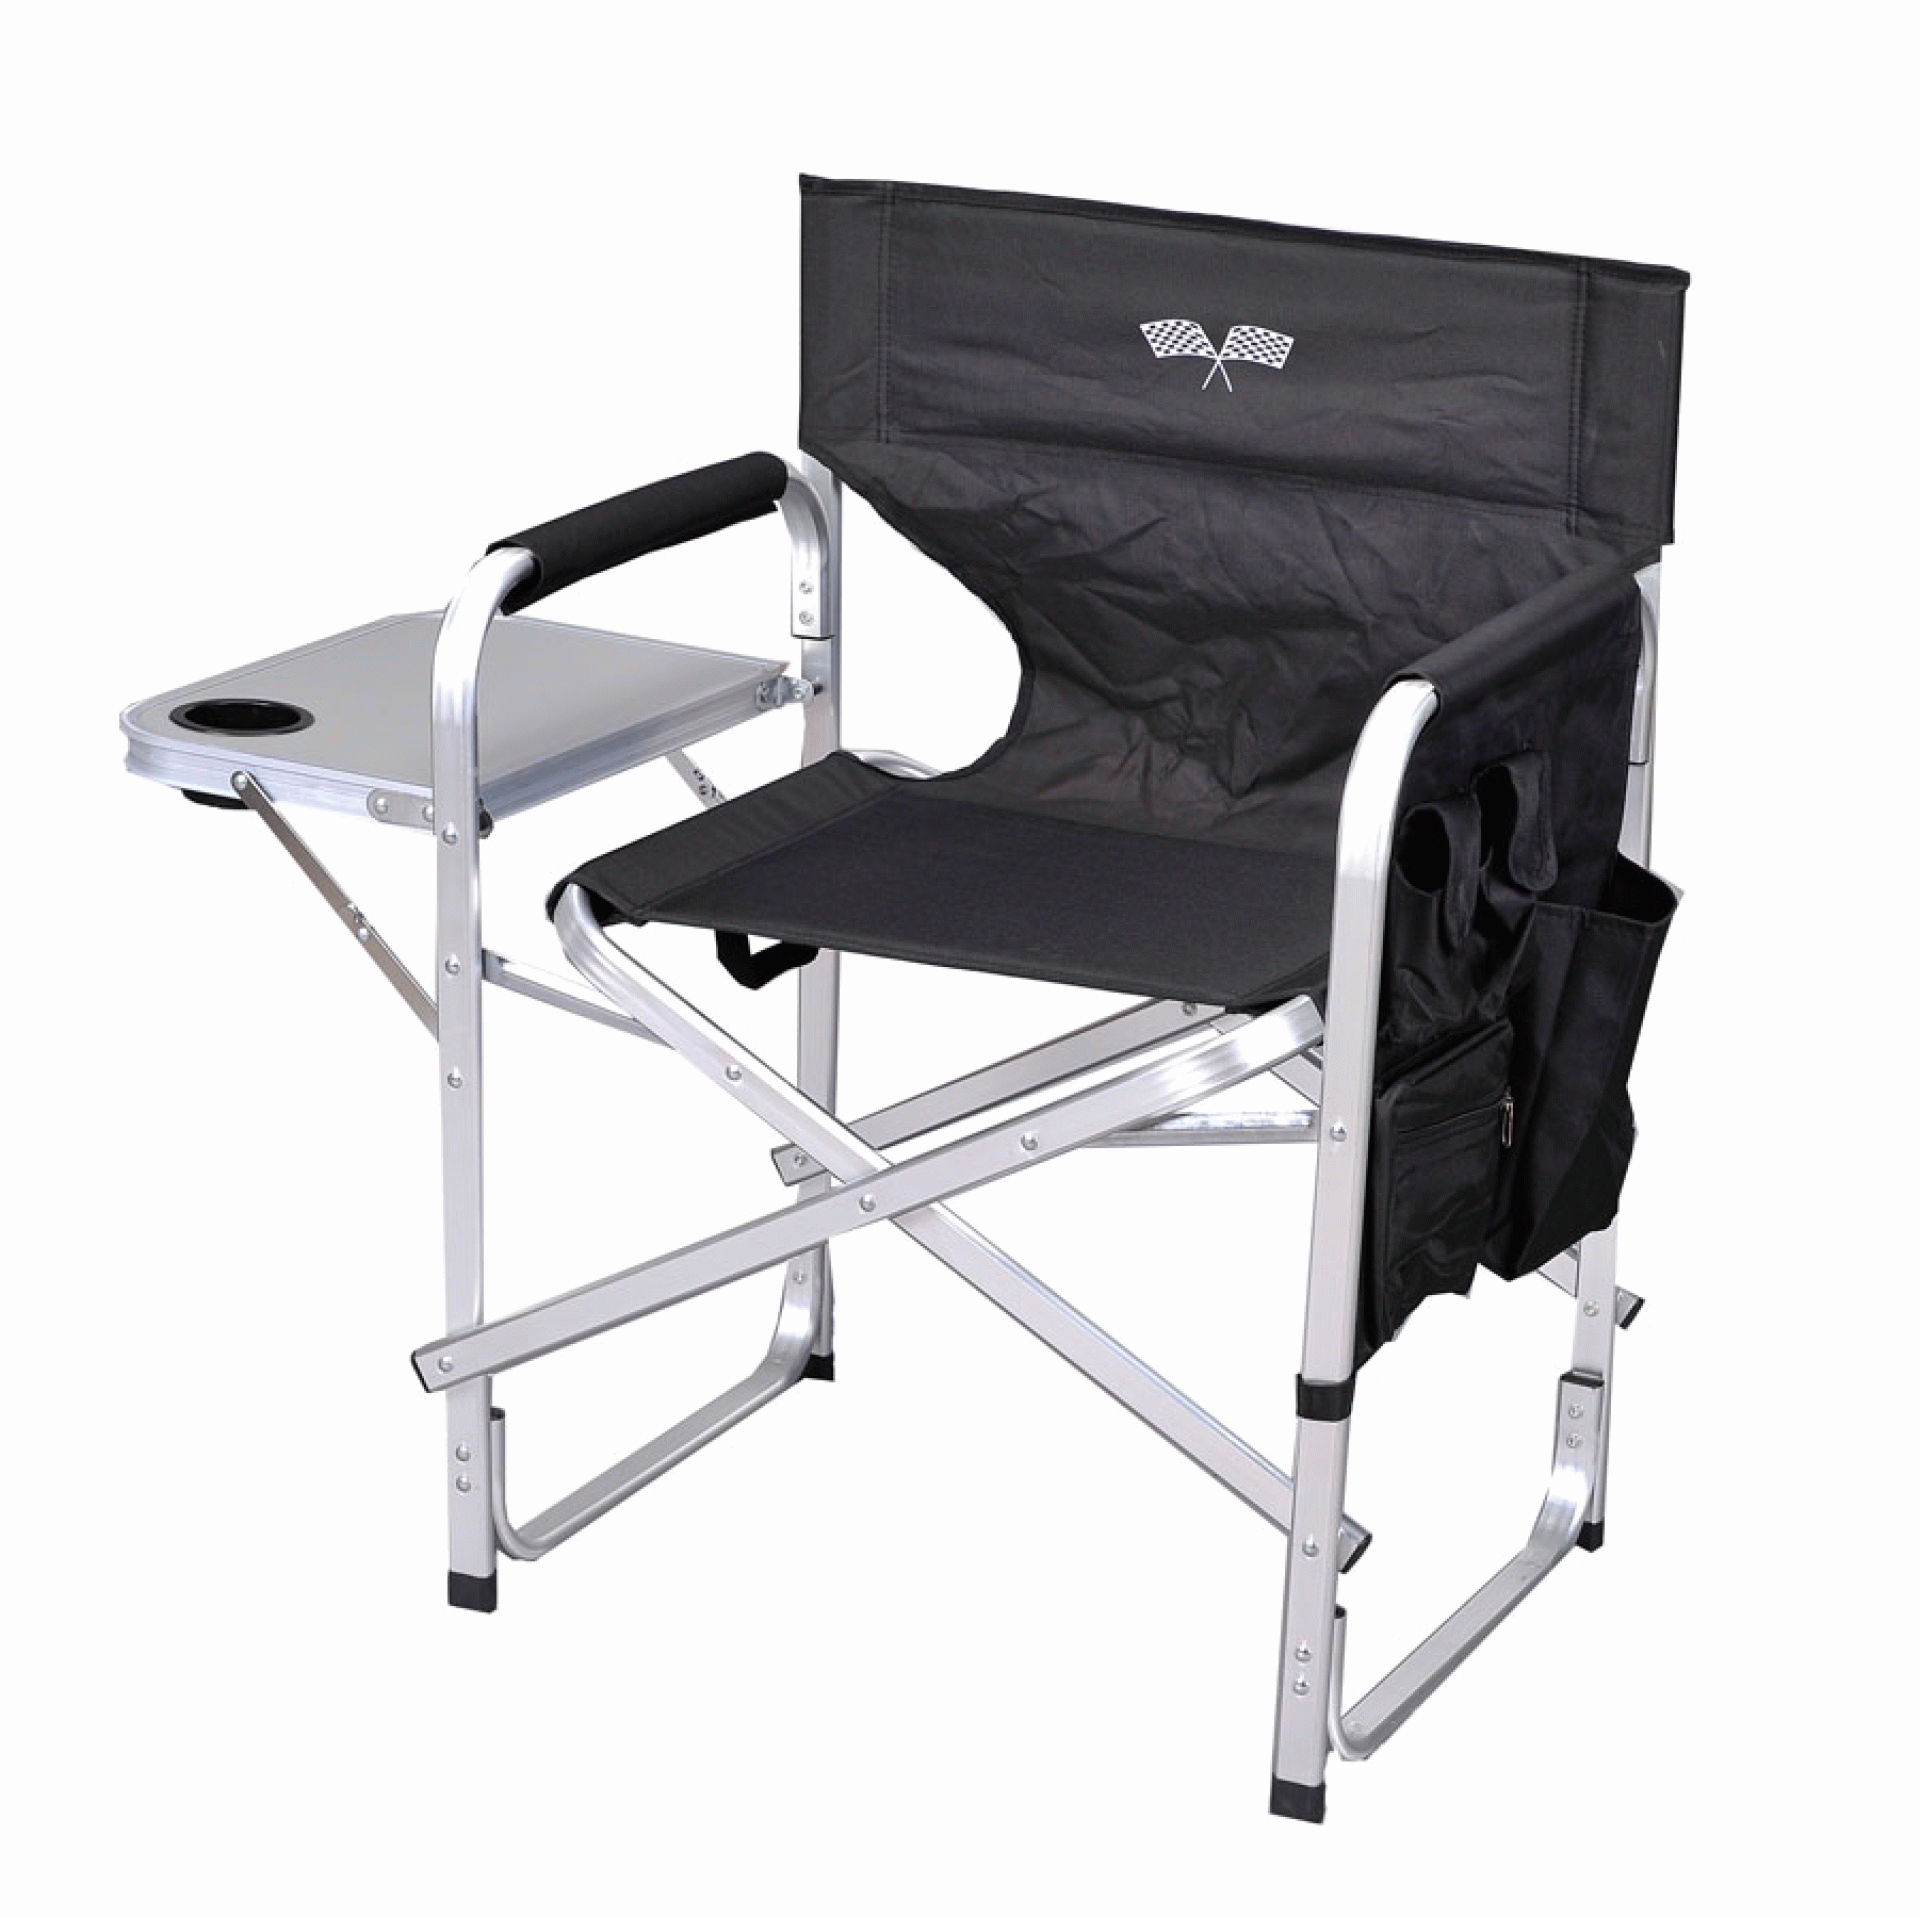 MINGS MARK INC. | SL1204BLACK/FLAG | DIRECTOR'S CHAIR W/ SIDE TABLE AND POCKETS - BLACK W/ RACING FLAG